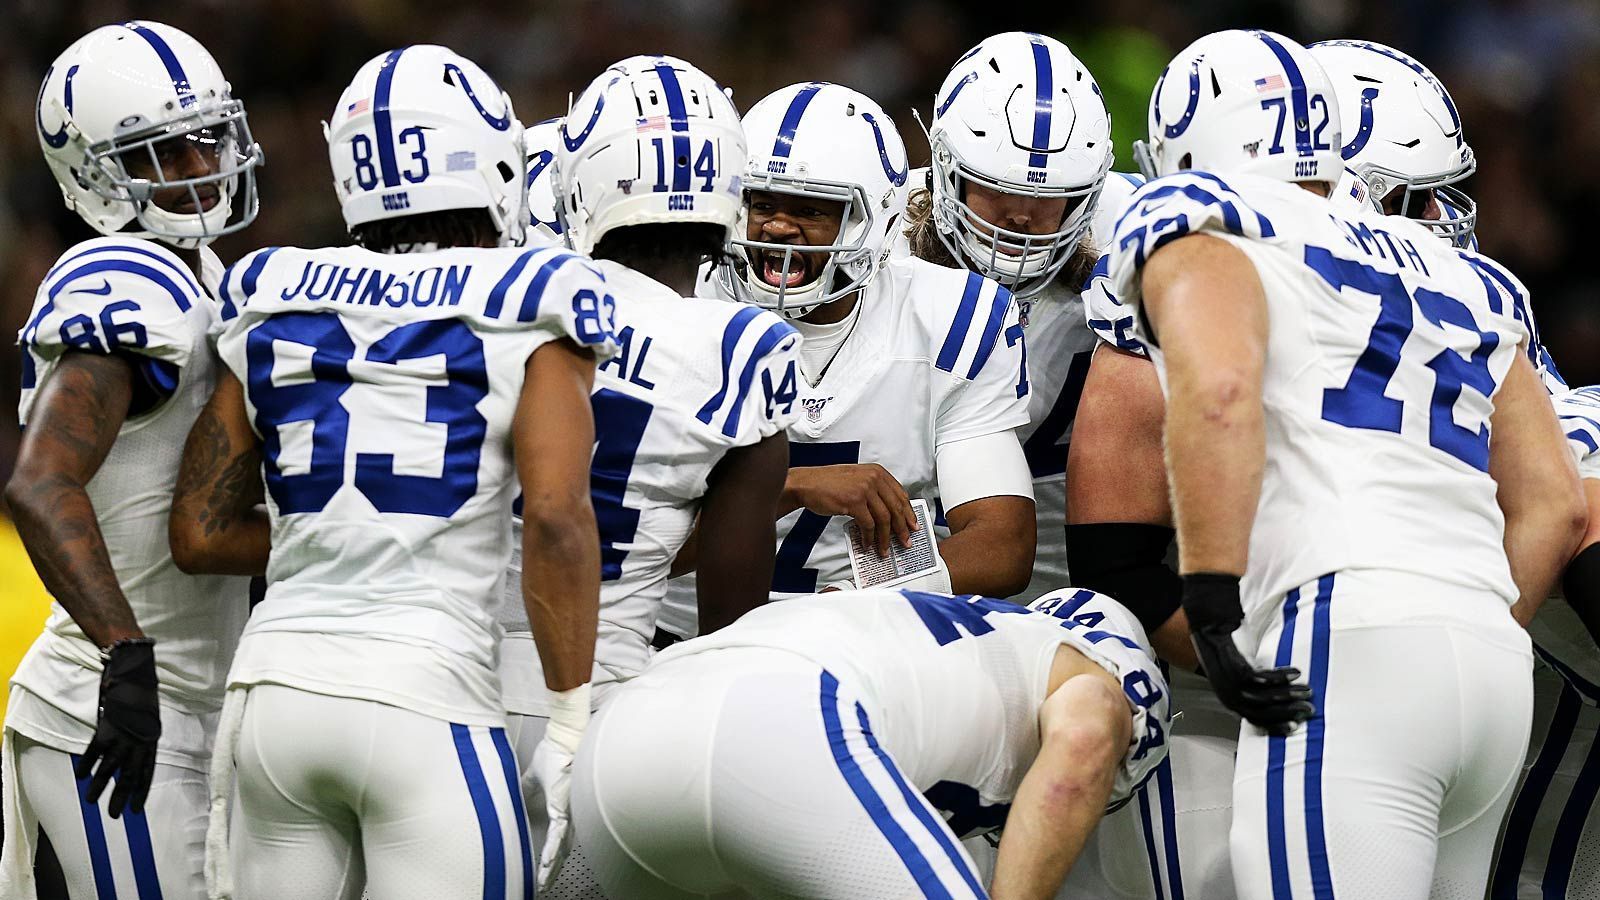 
                <strong>Indianapolis Colts</strong><br>
                Ausgeschieden nach Woche 15AFC South:1. Houston Texans (9-5)2. Tennessee Titans (8-6)3. Indianapolis Colts (6-8)4. Jacksonville Jaguars (5-9) 
              